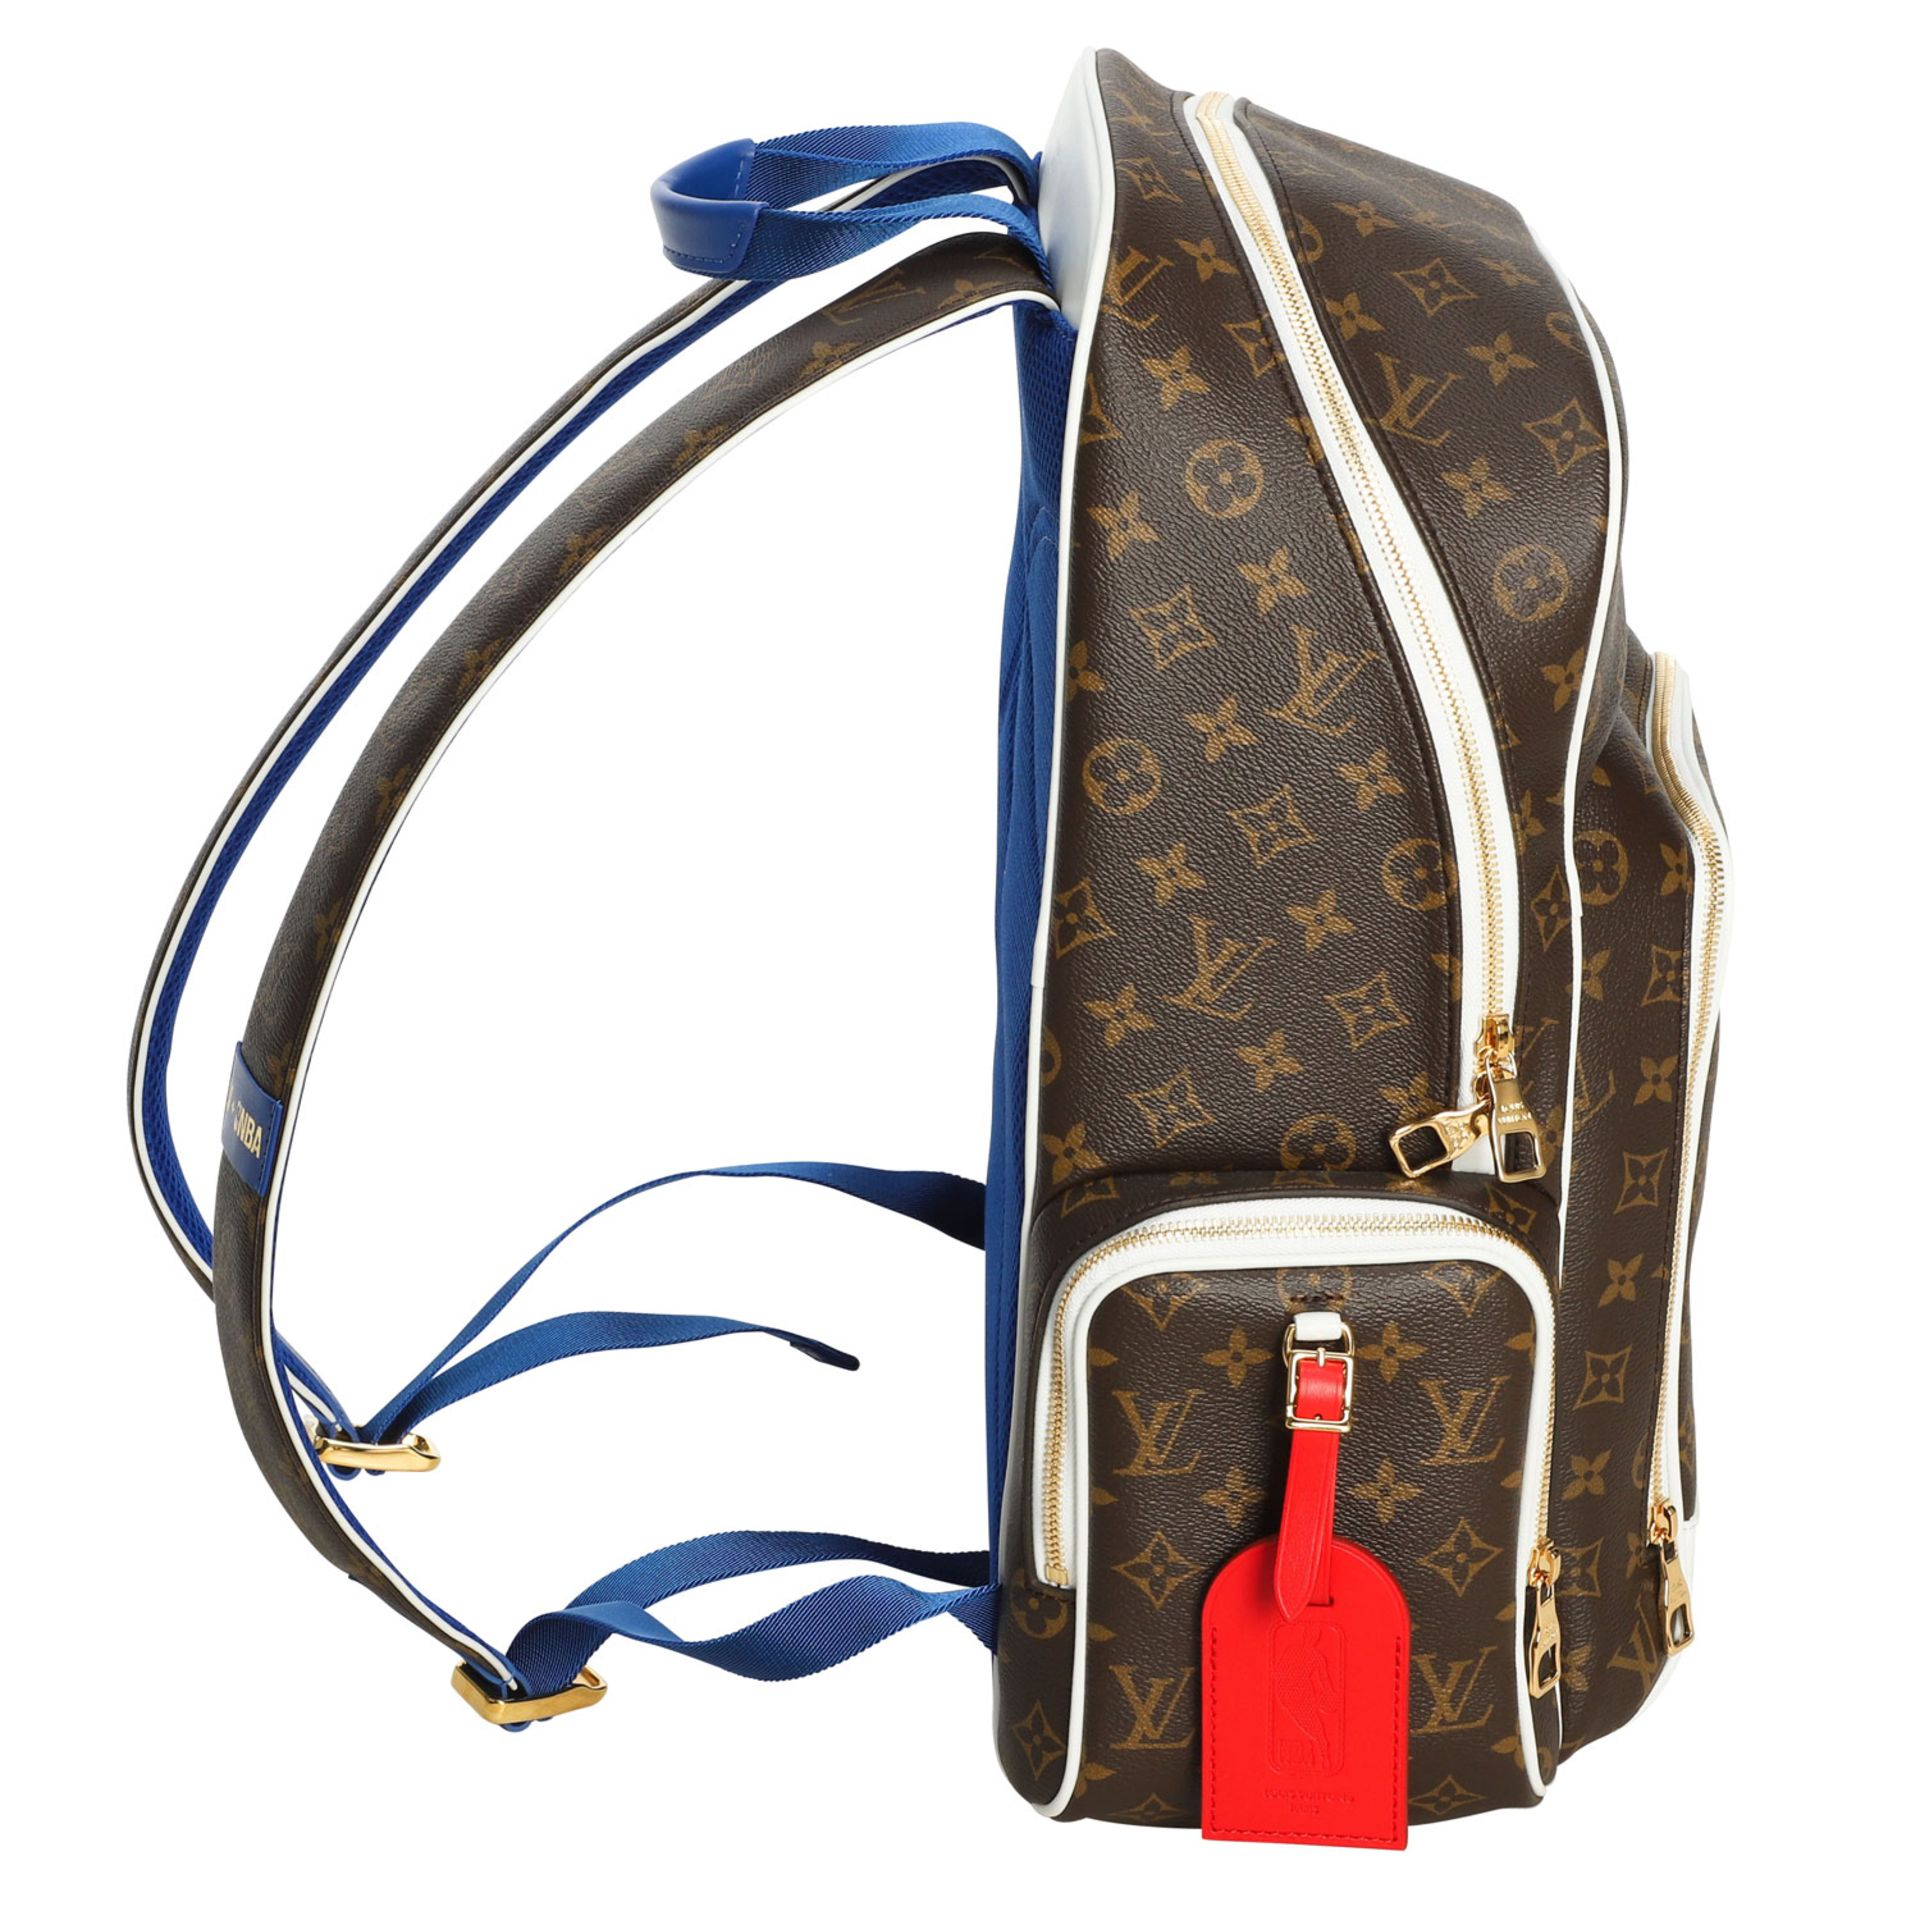 LOUIS VUITTON x NBA Rucksack "NEW BACKPACK". - Image 3 of 8